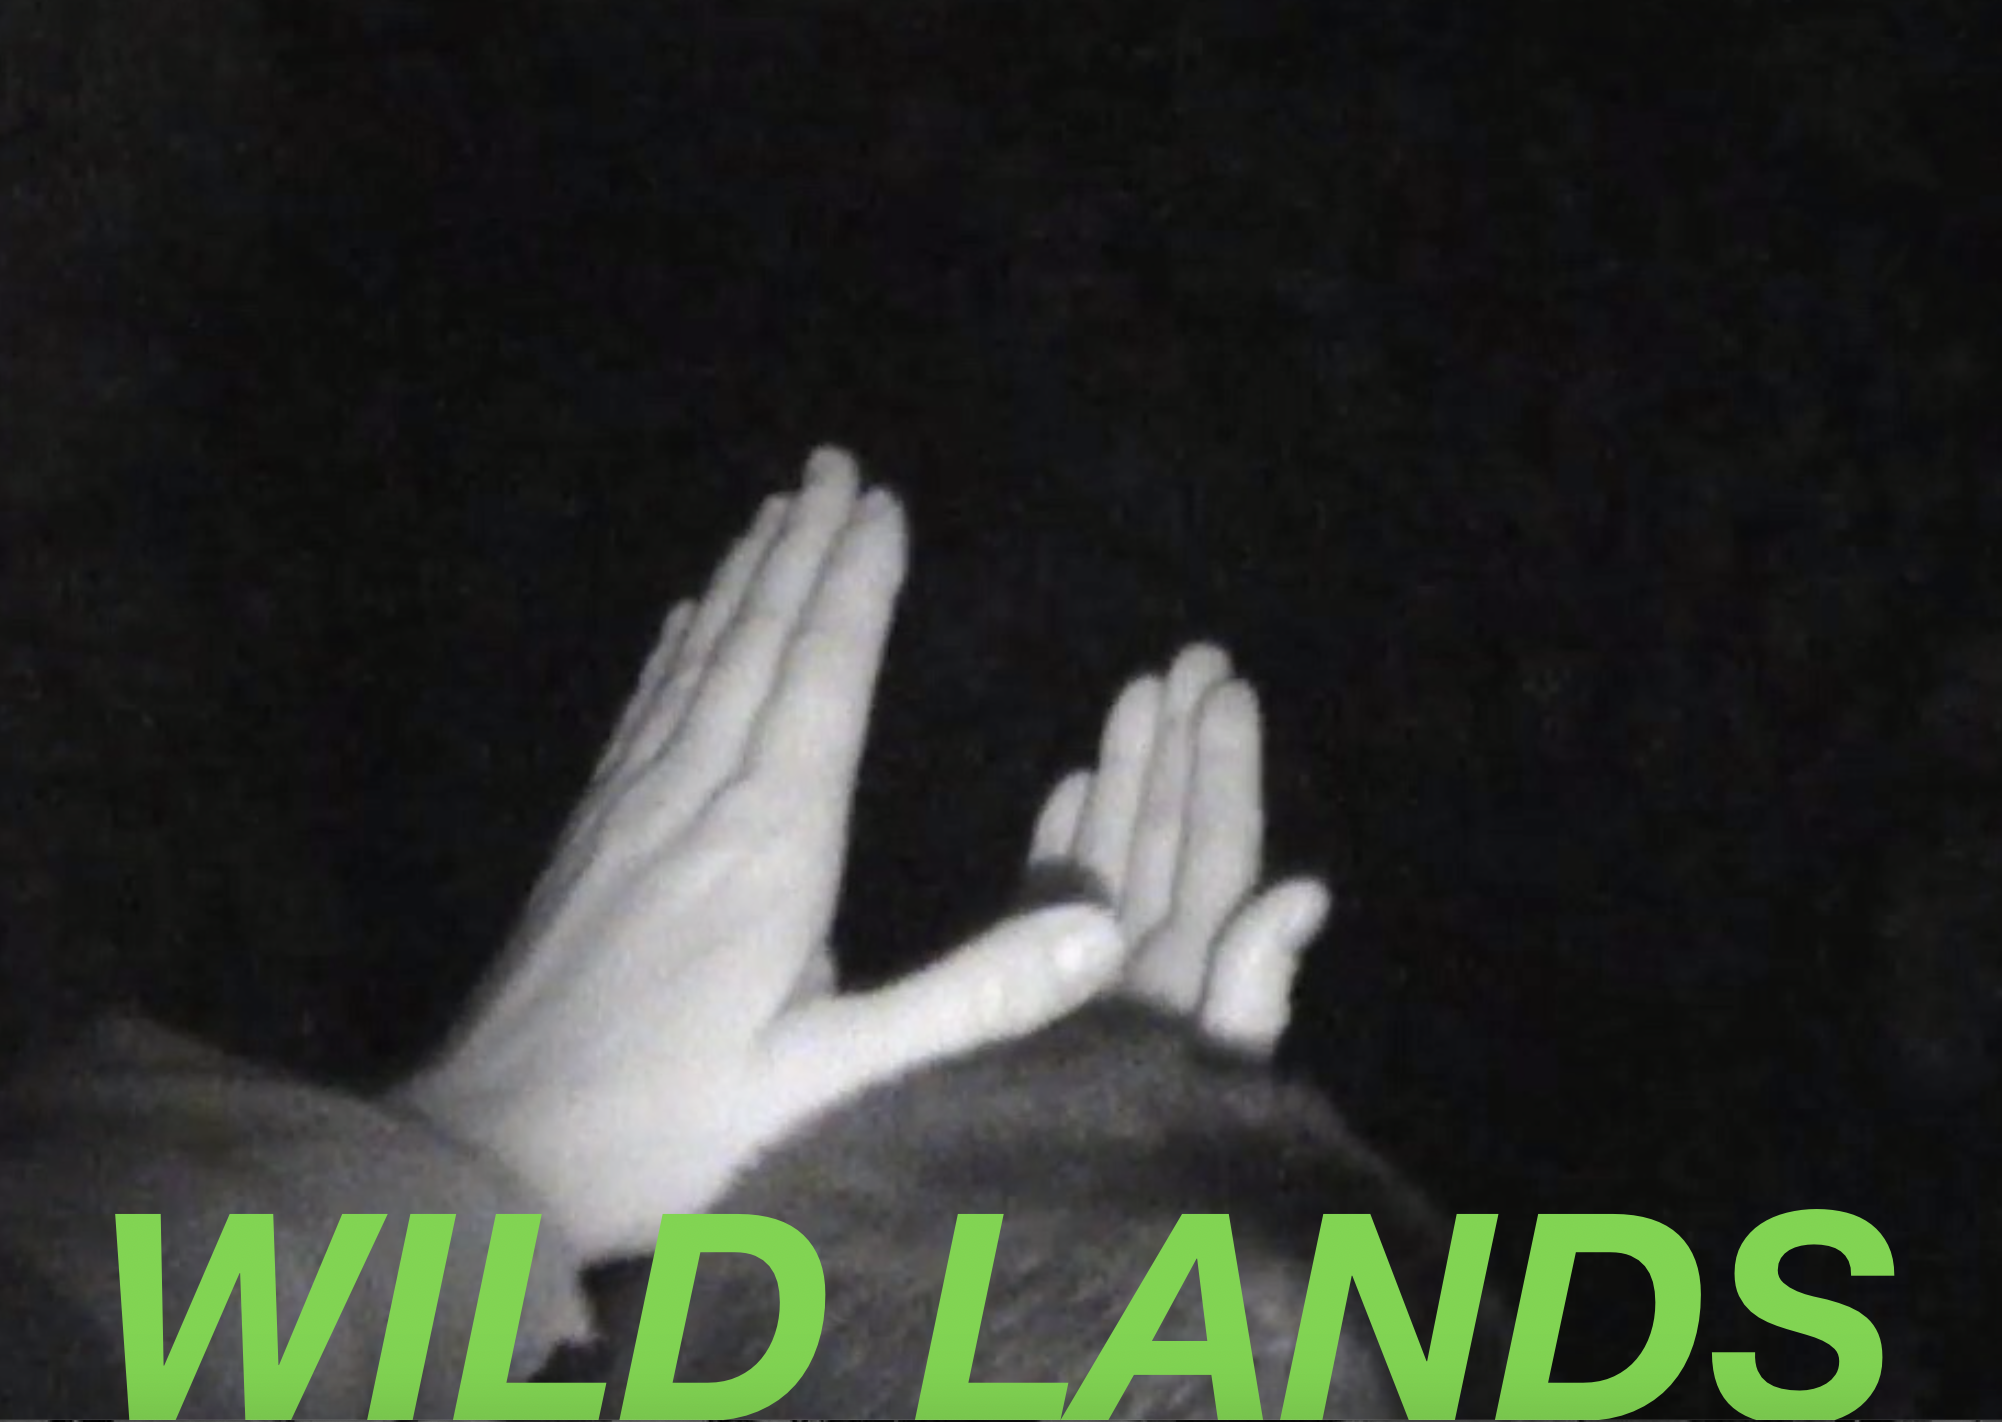 WILD LANDS. Portico Library Dec.2019. Choreographic Video and Discussion. With Juliet Davis, Rowland Hill and Joe Whitmore.3.png